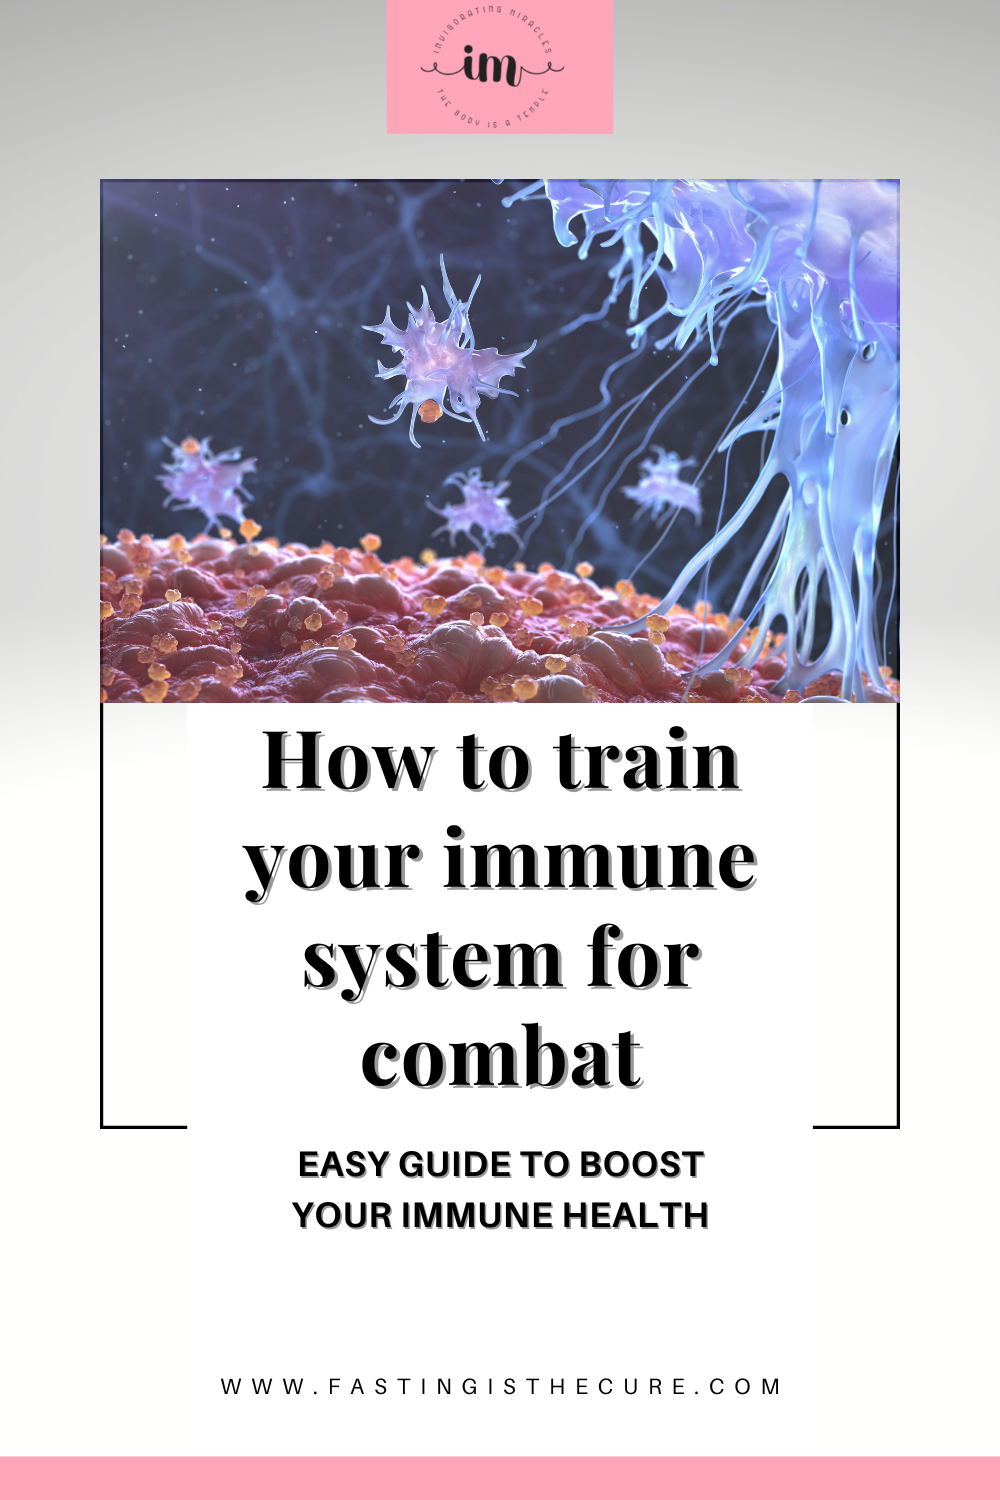 The ultimate guide to training your immune system!